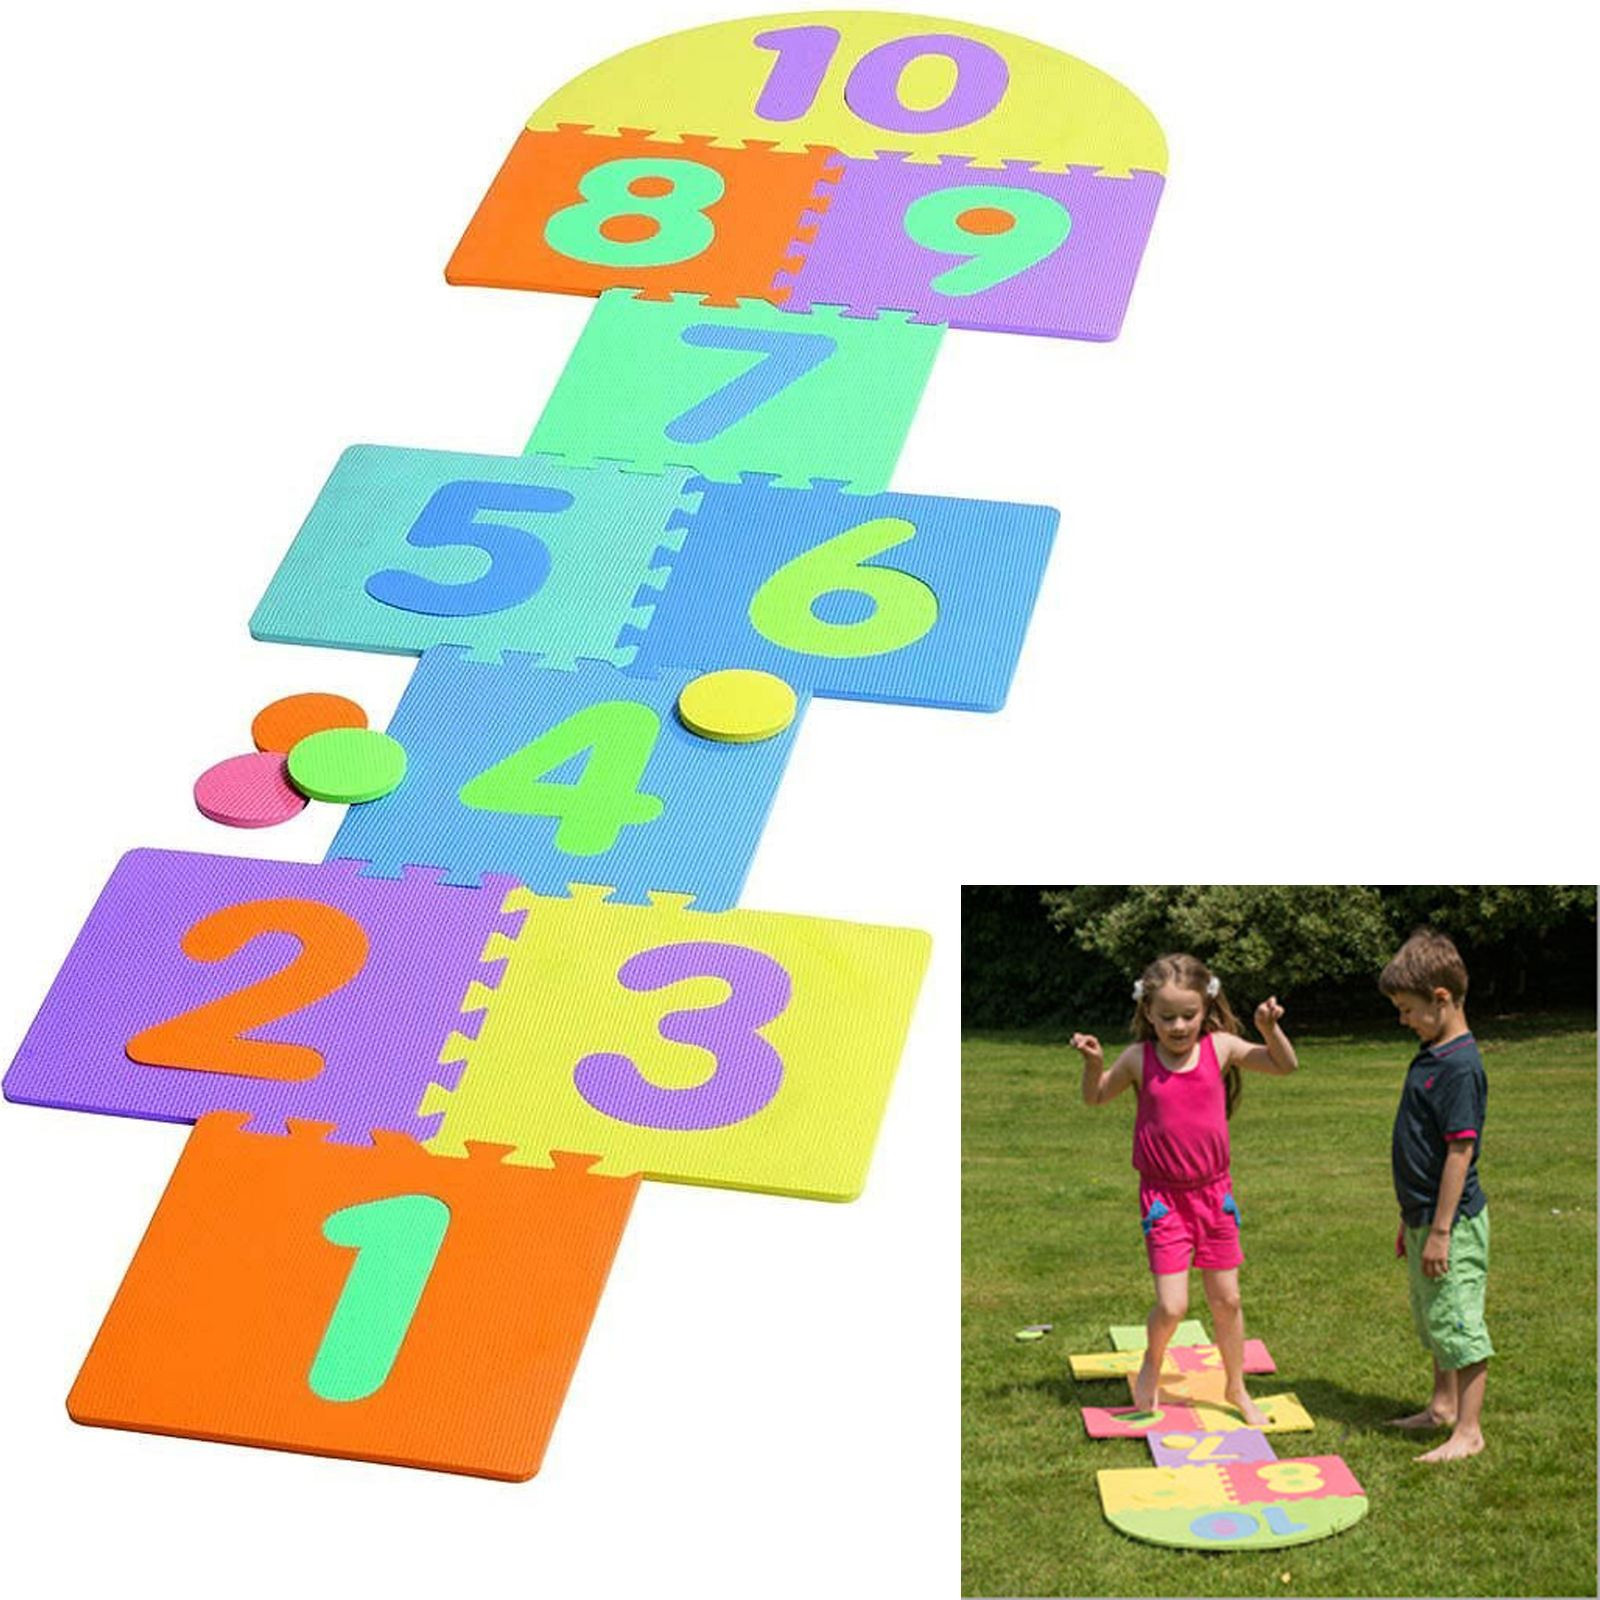 Summer Party Games For Kids
 LARGE FAMILY OUTDOOR PARTY GAMES SUMMER BEACH BBQ PARTY